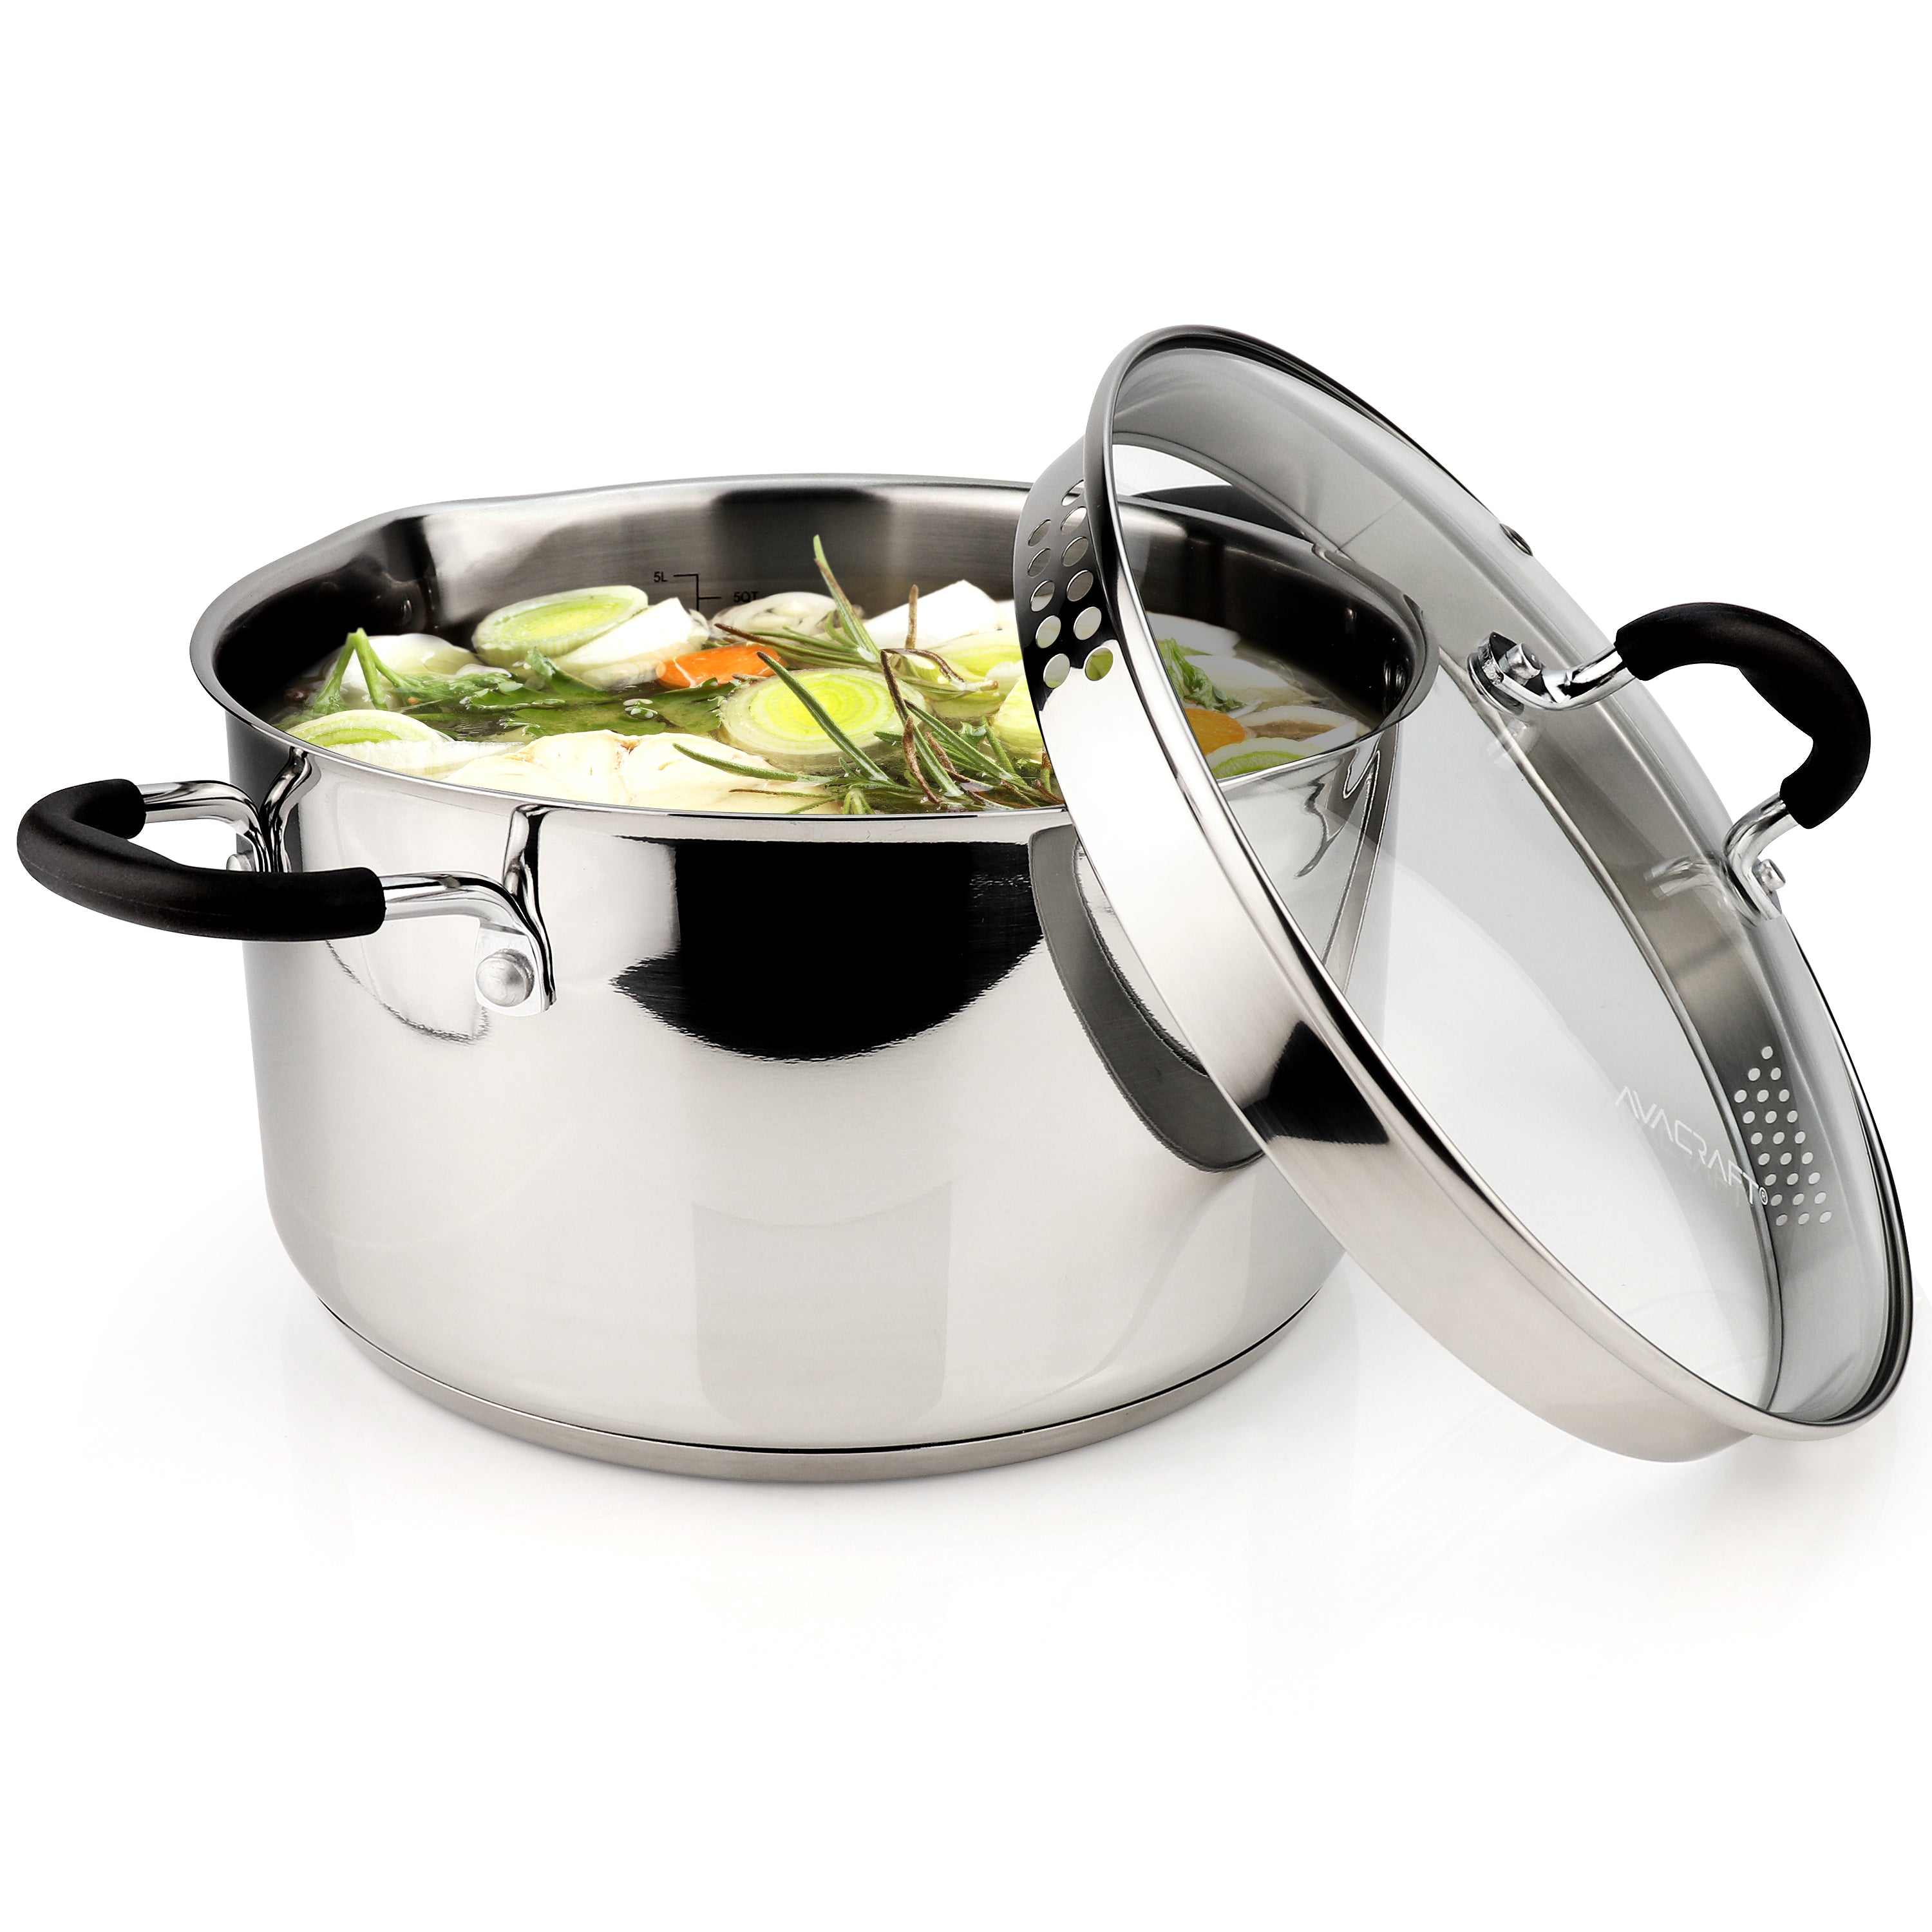 6 QT Stainless Steel 18/10 Induction Stock Pot (Free Gift 2 Spoons